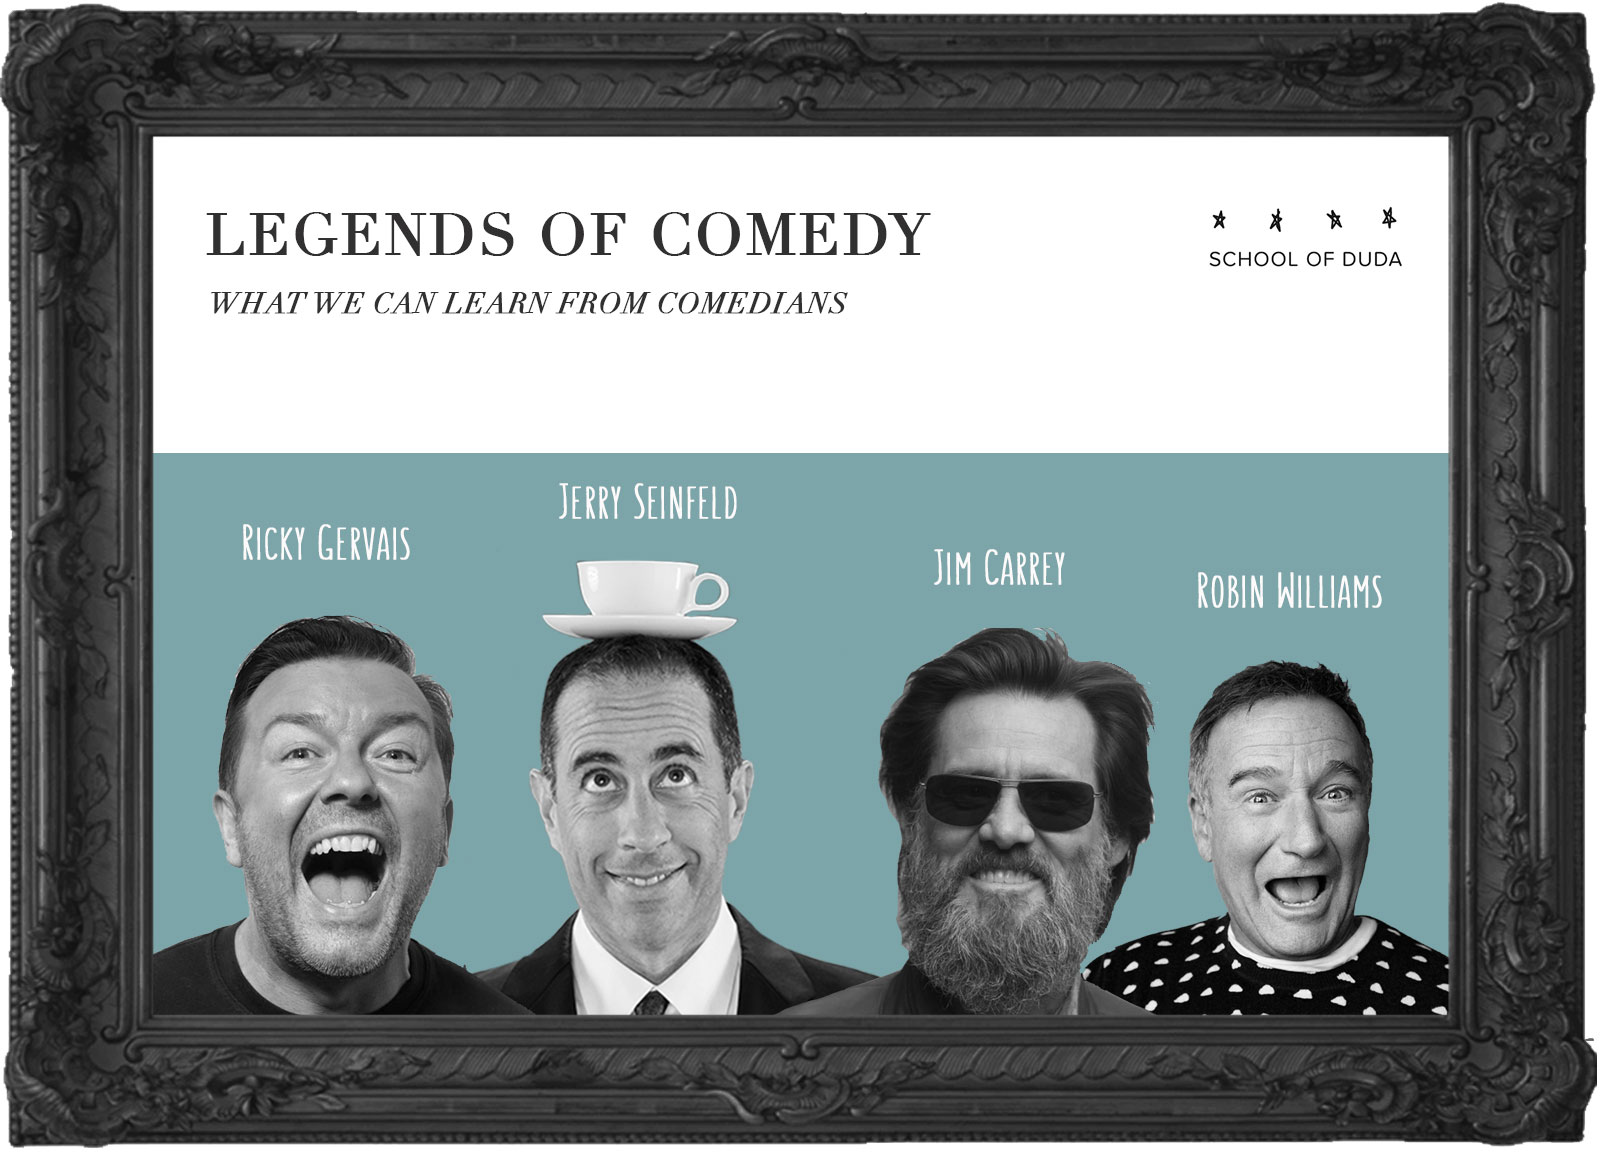 LEGENDS OF COMEDY - English Course